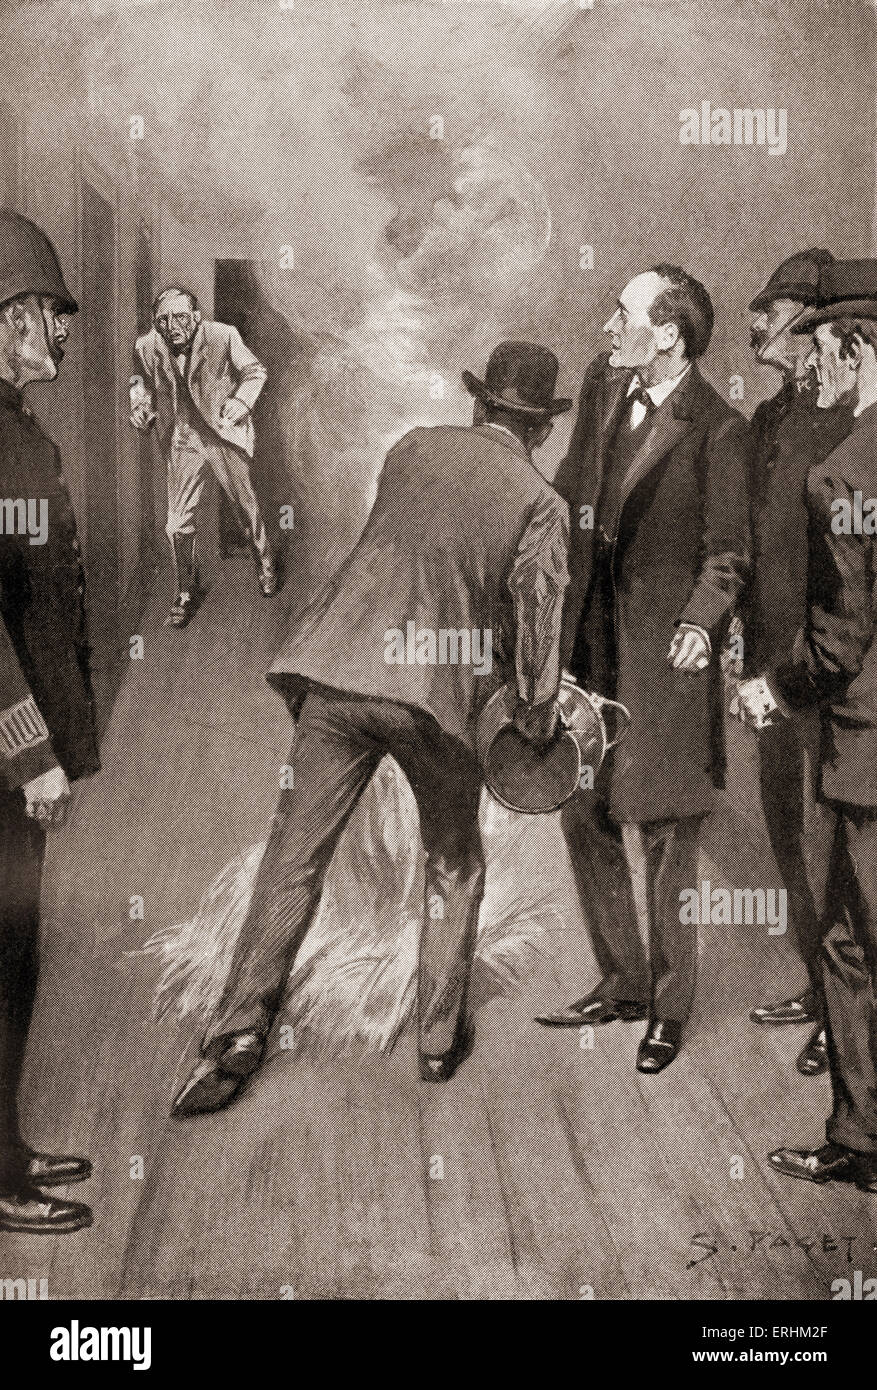 'The Return of Sherlock Holmes' by Sir Arthur Conan Doyle - witness Jonas Oldacre emerging from the end of the corridor. From Stock Photo